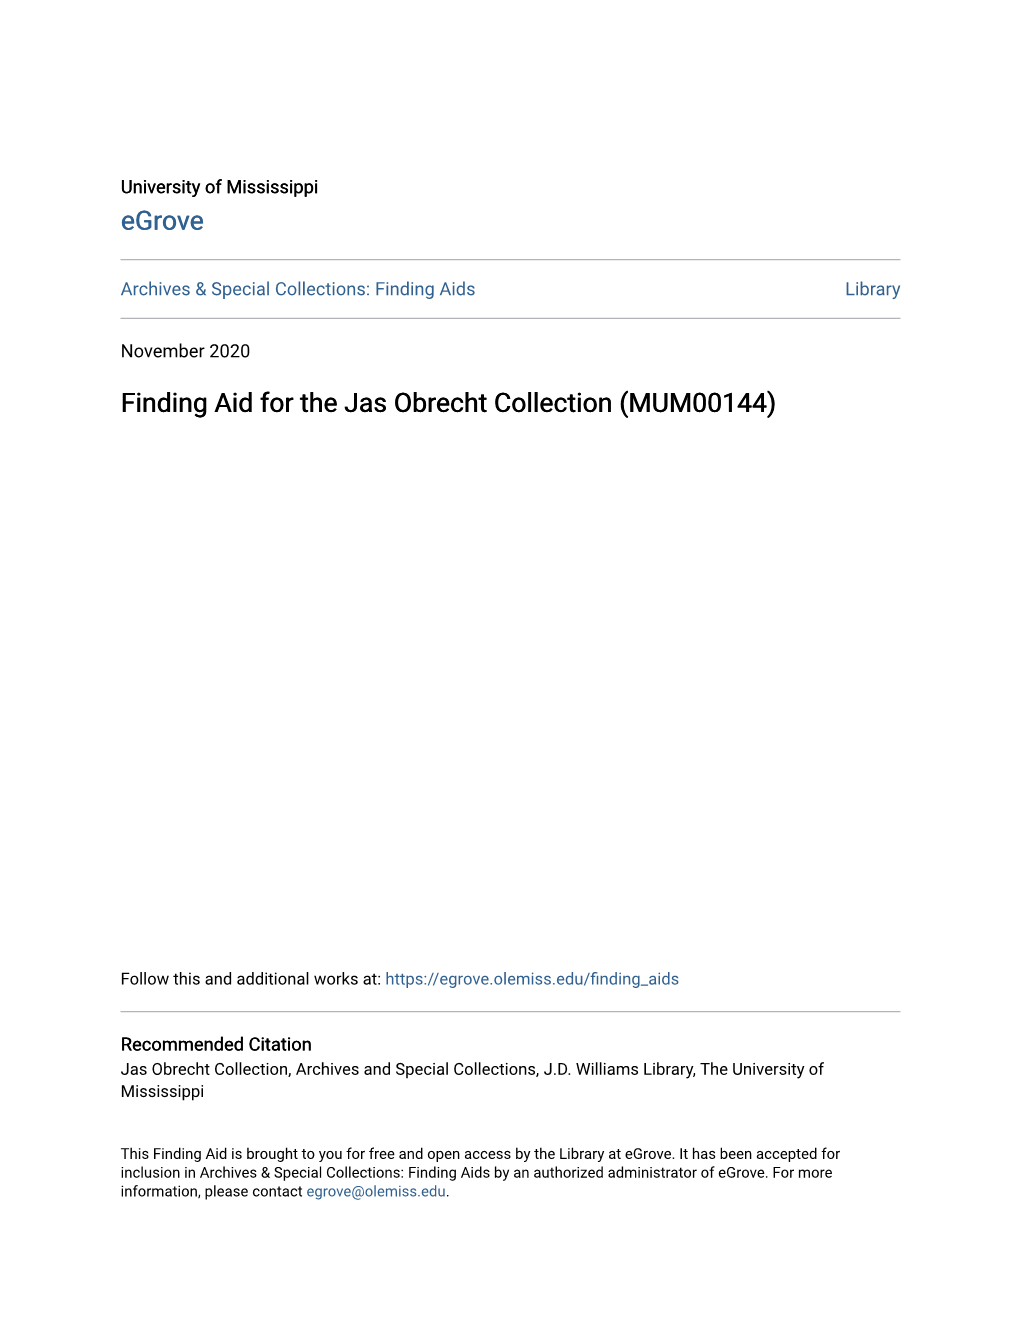 Finding Aid for the Jas Obrecht Collection (MUM00144)